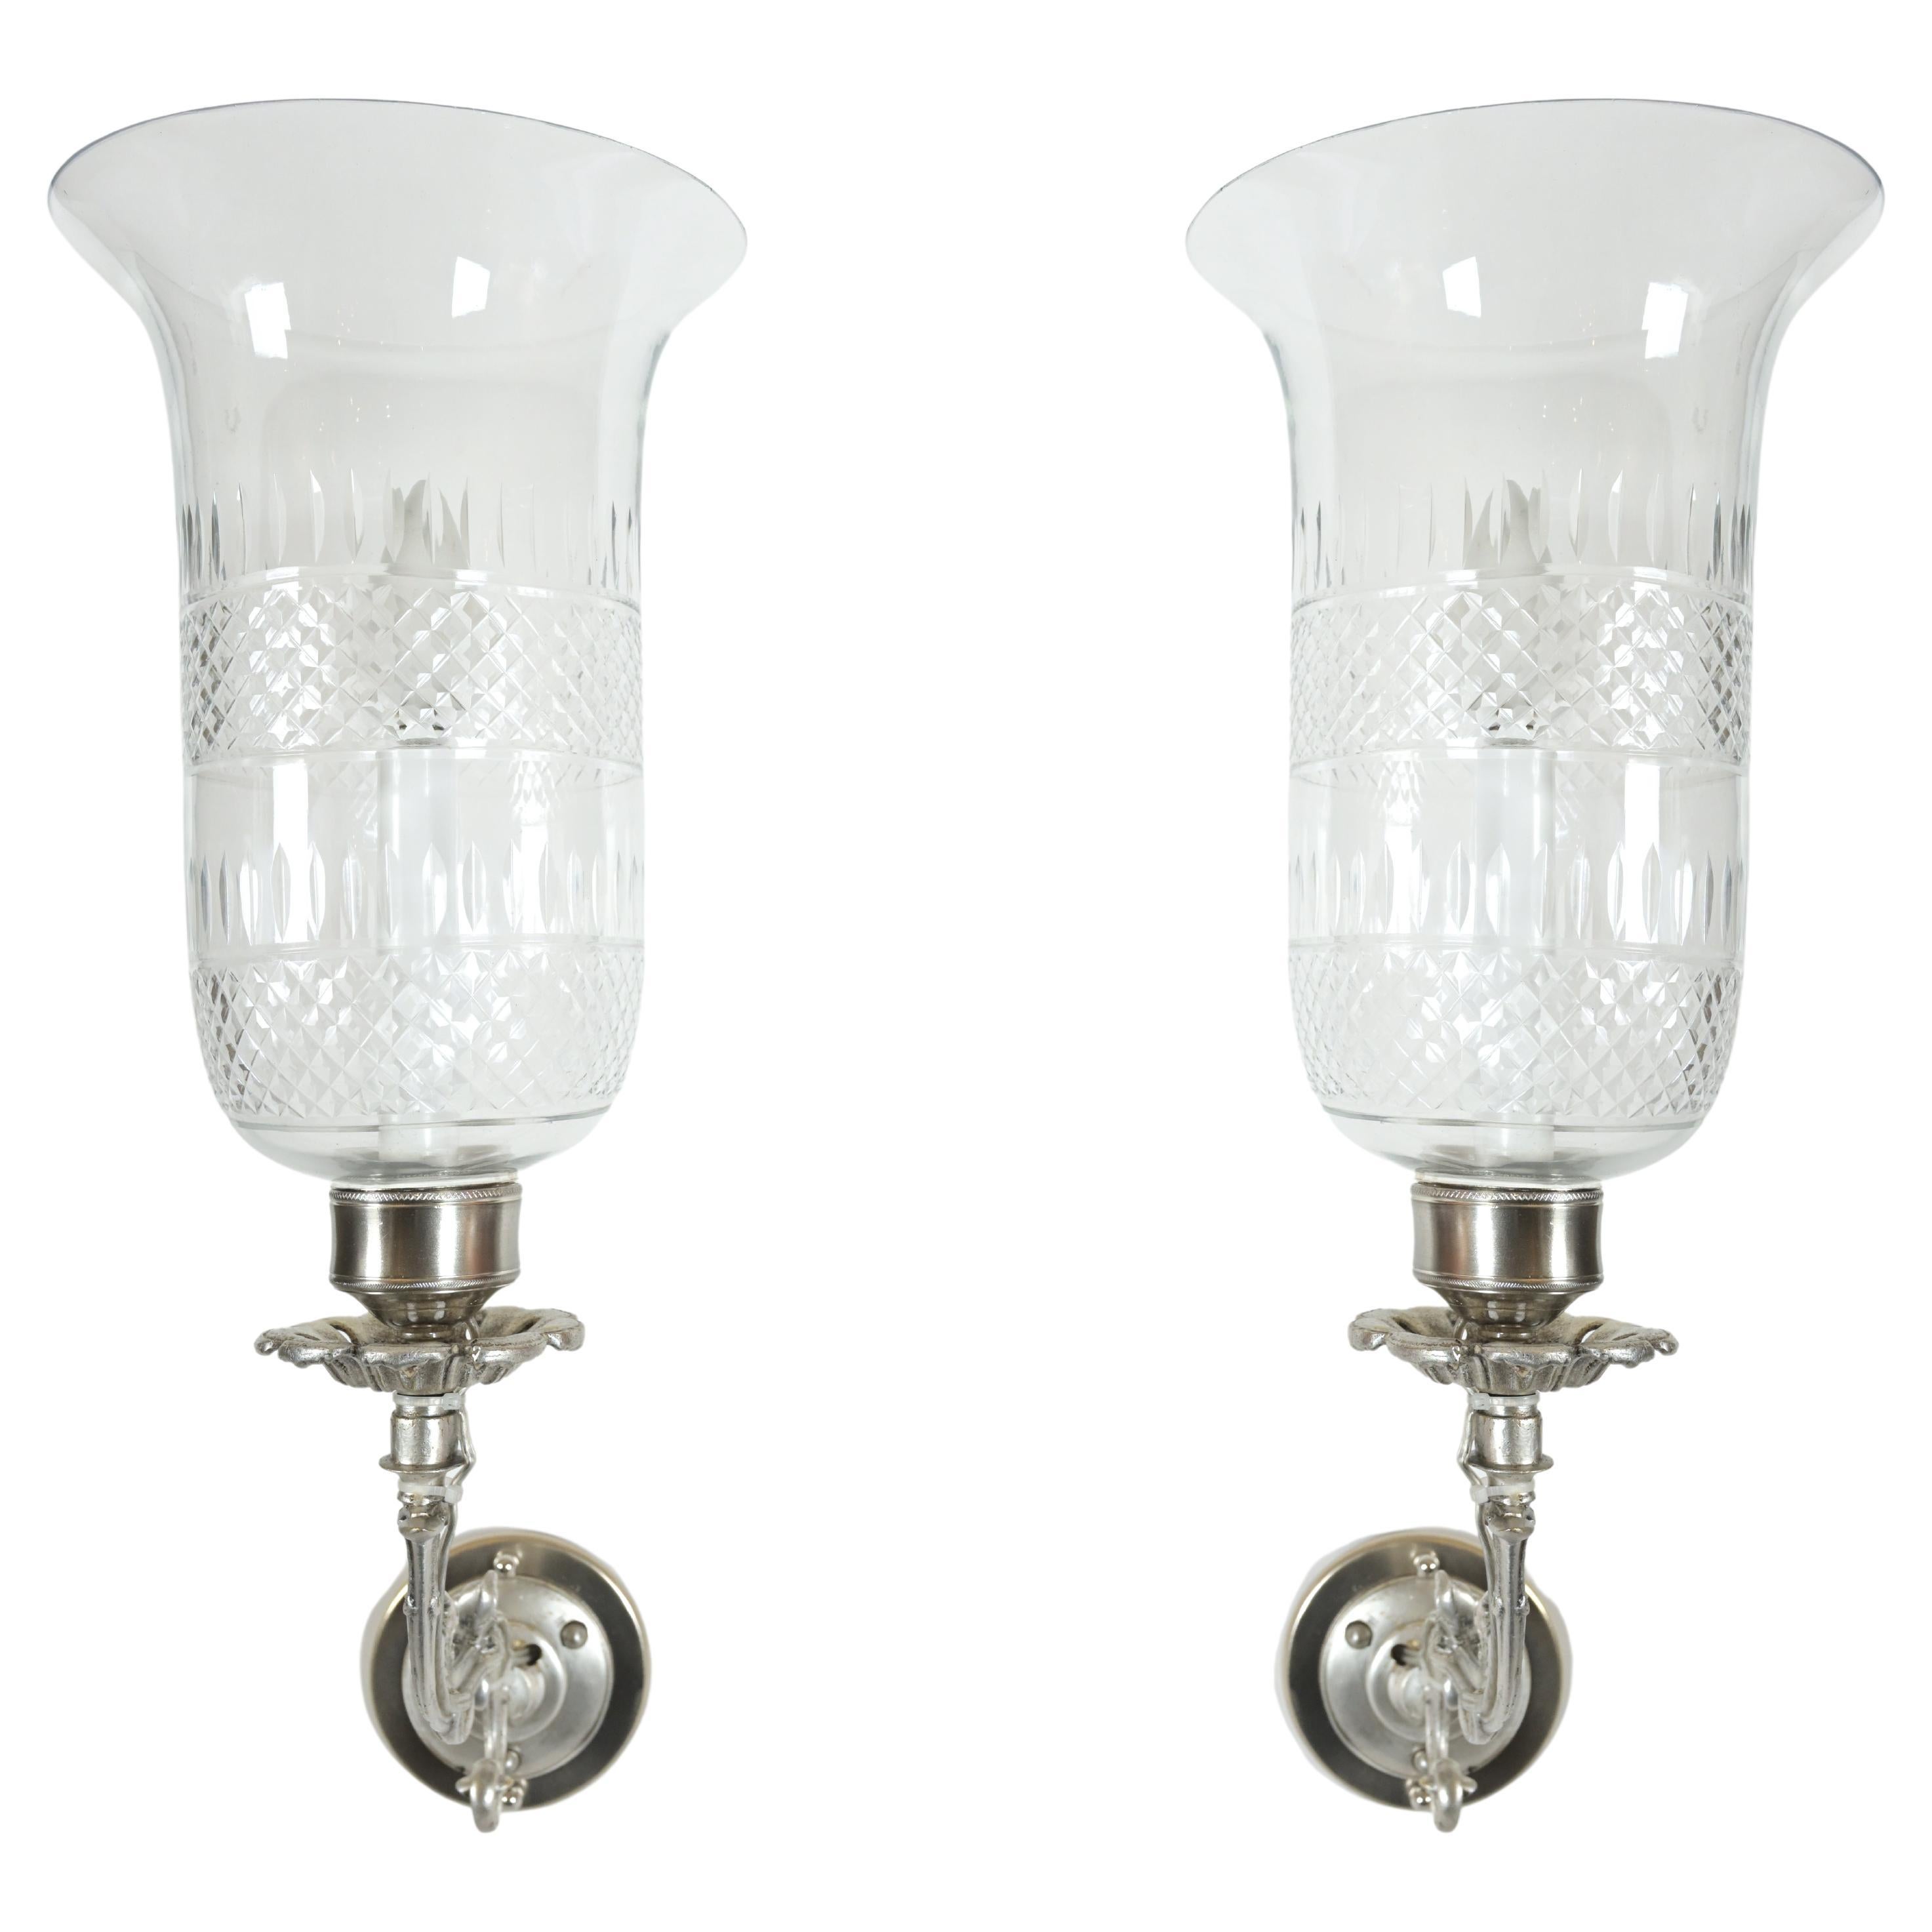 Pair of 19th Century Antique Silver Sconces with Cut Crystal Hurricane Shades